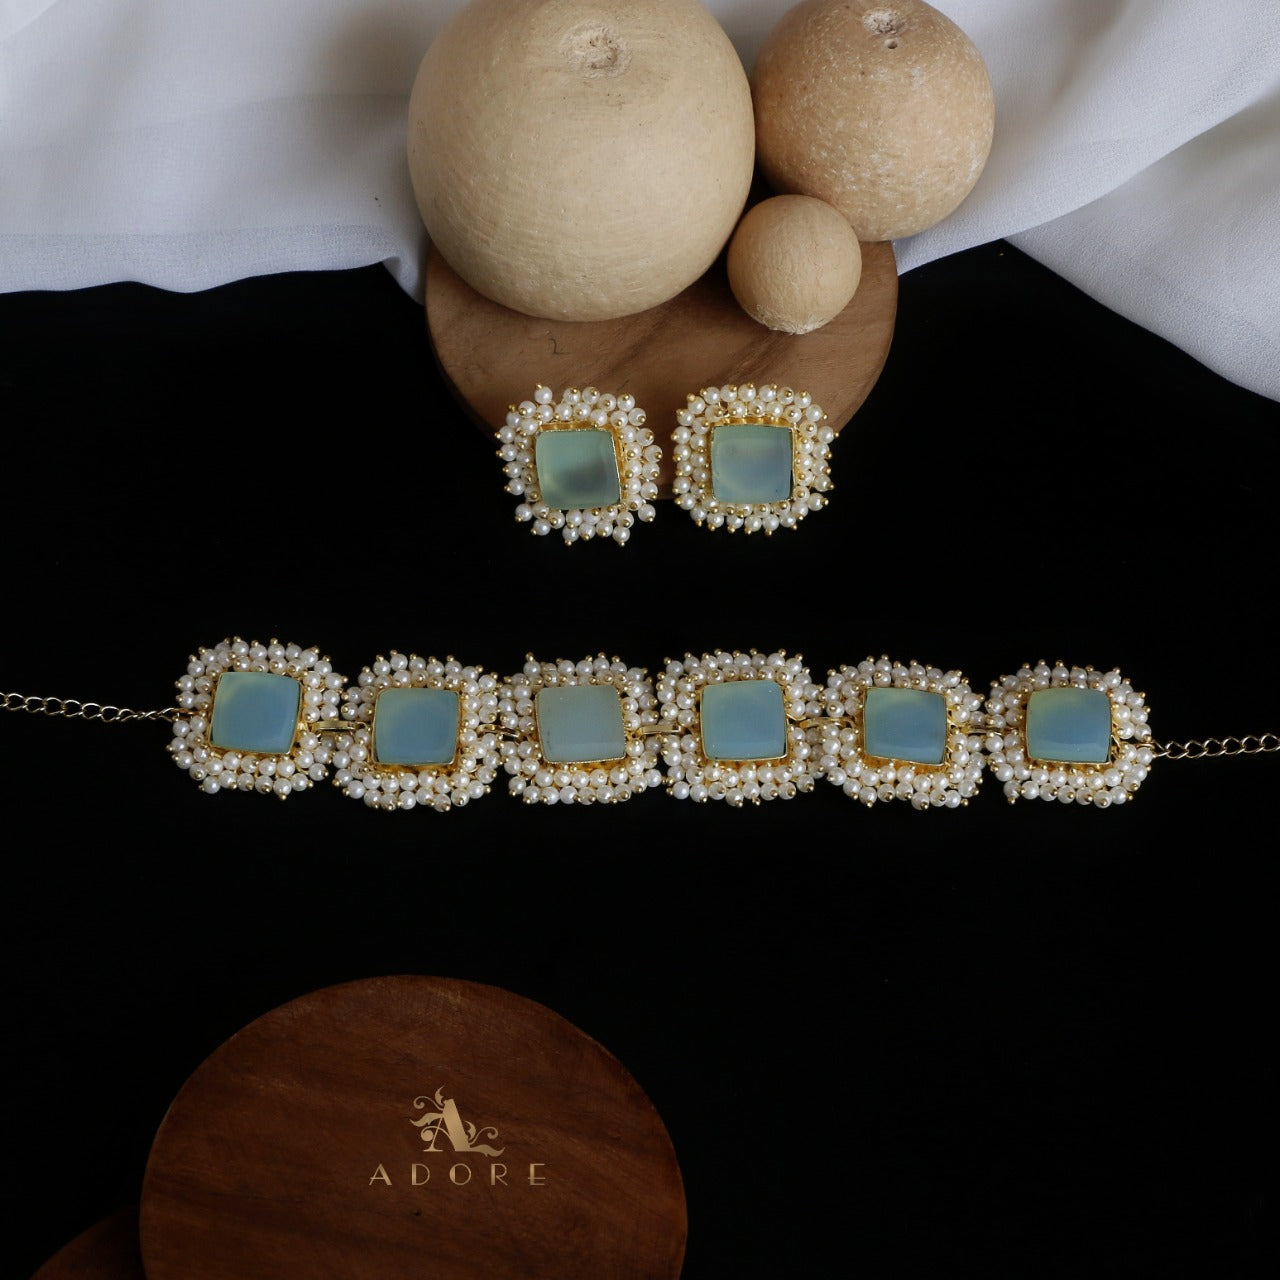 Full Pearl Square Choker With Earring